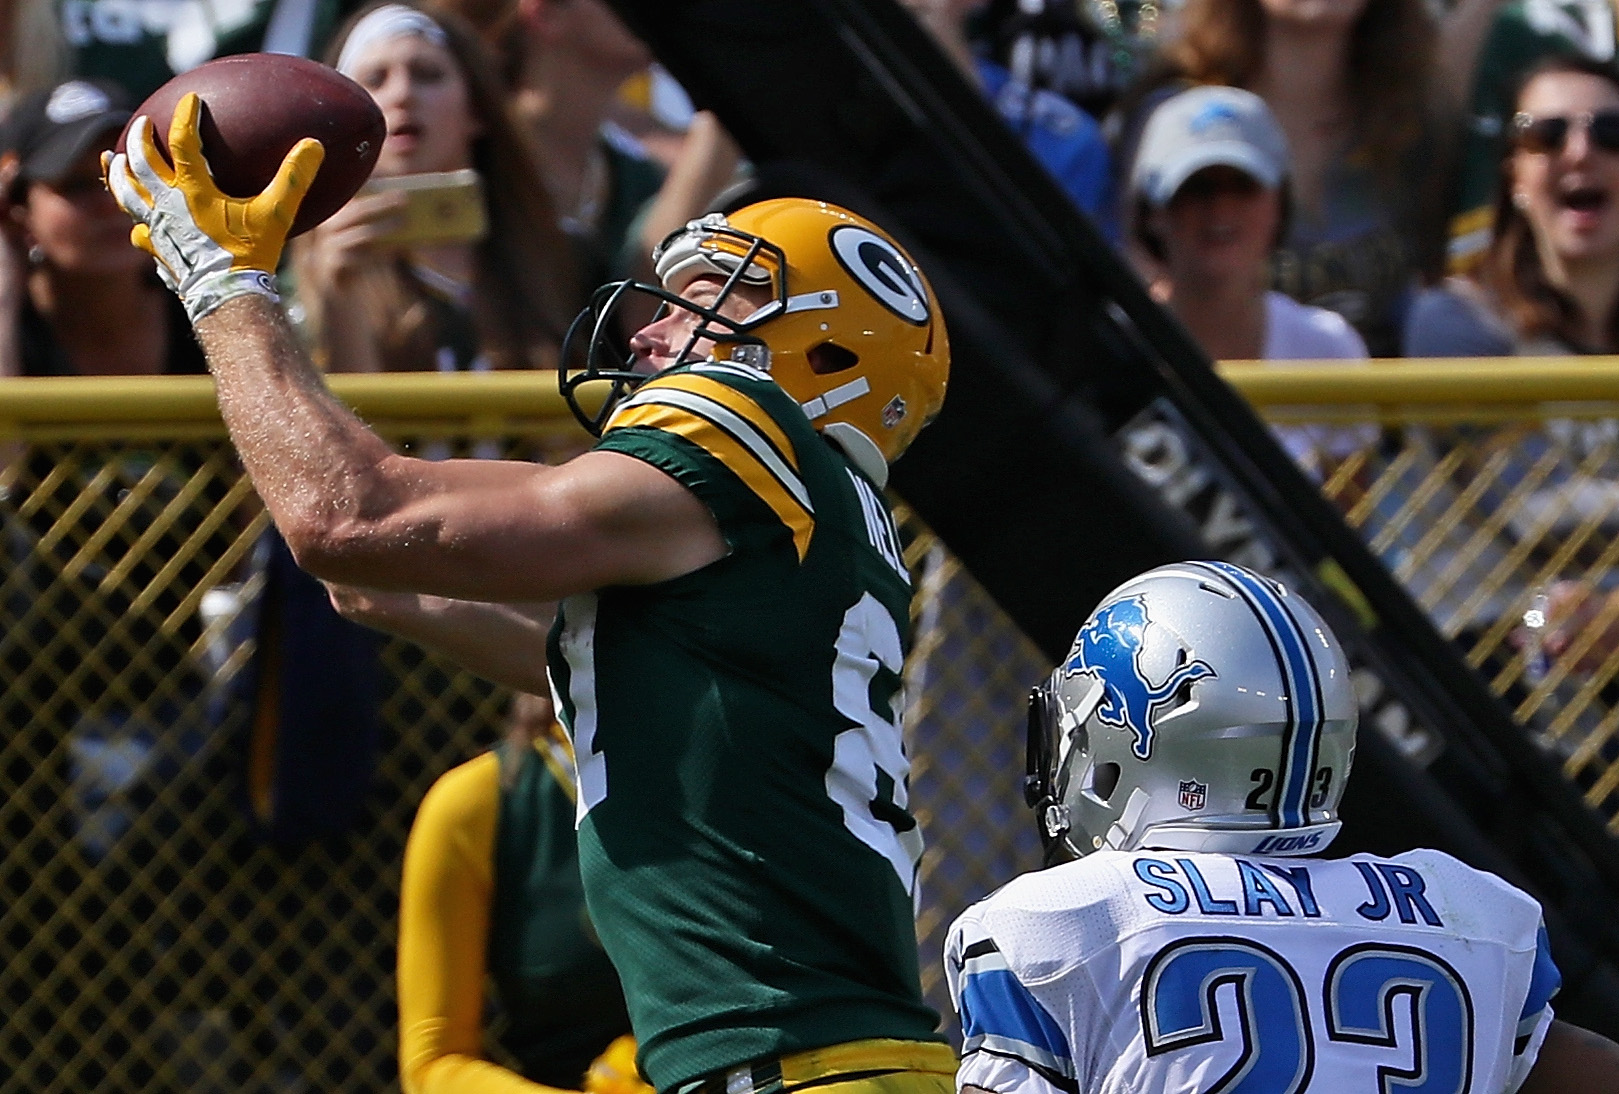 GREEN BAY, WI - SEPTEMBER 25: Jordy Nelson #87 of the Green Bay Packers catches a touchdown pass in the second quarter over Darius Slay #23 of the Detroit Lions at Lambeau Field on September 25, 2016 in Green Bay, Wisconsin. (Photo by Jonathan Daniel/Getty Images)